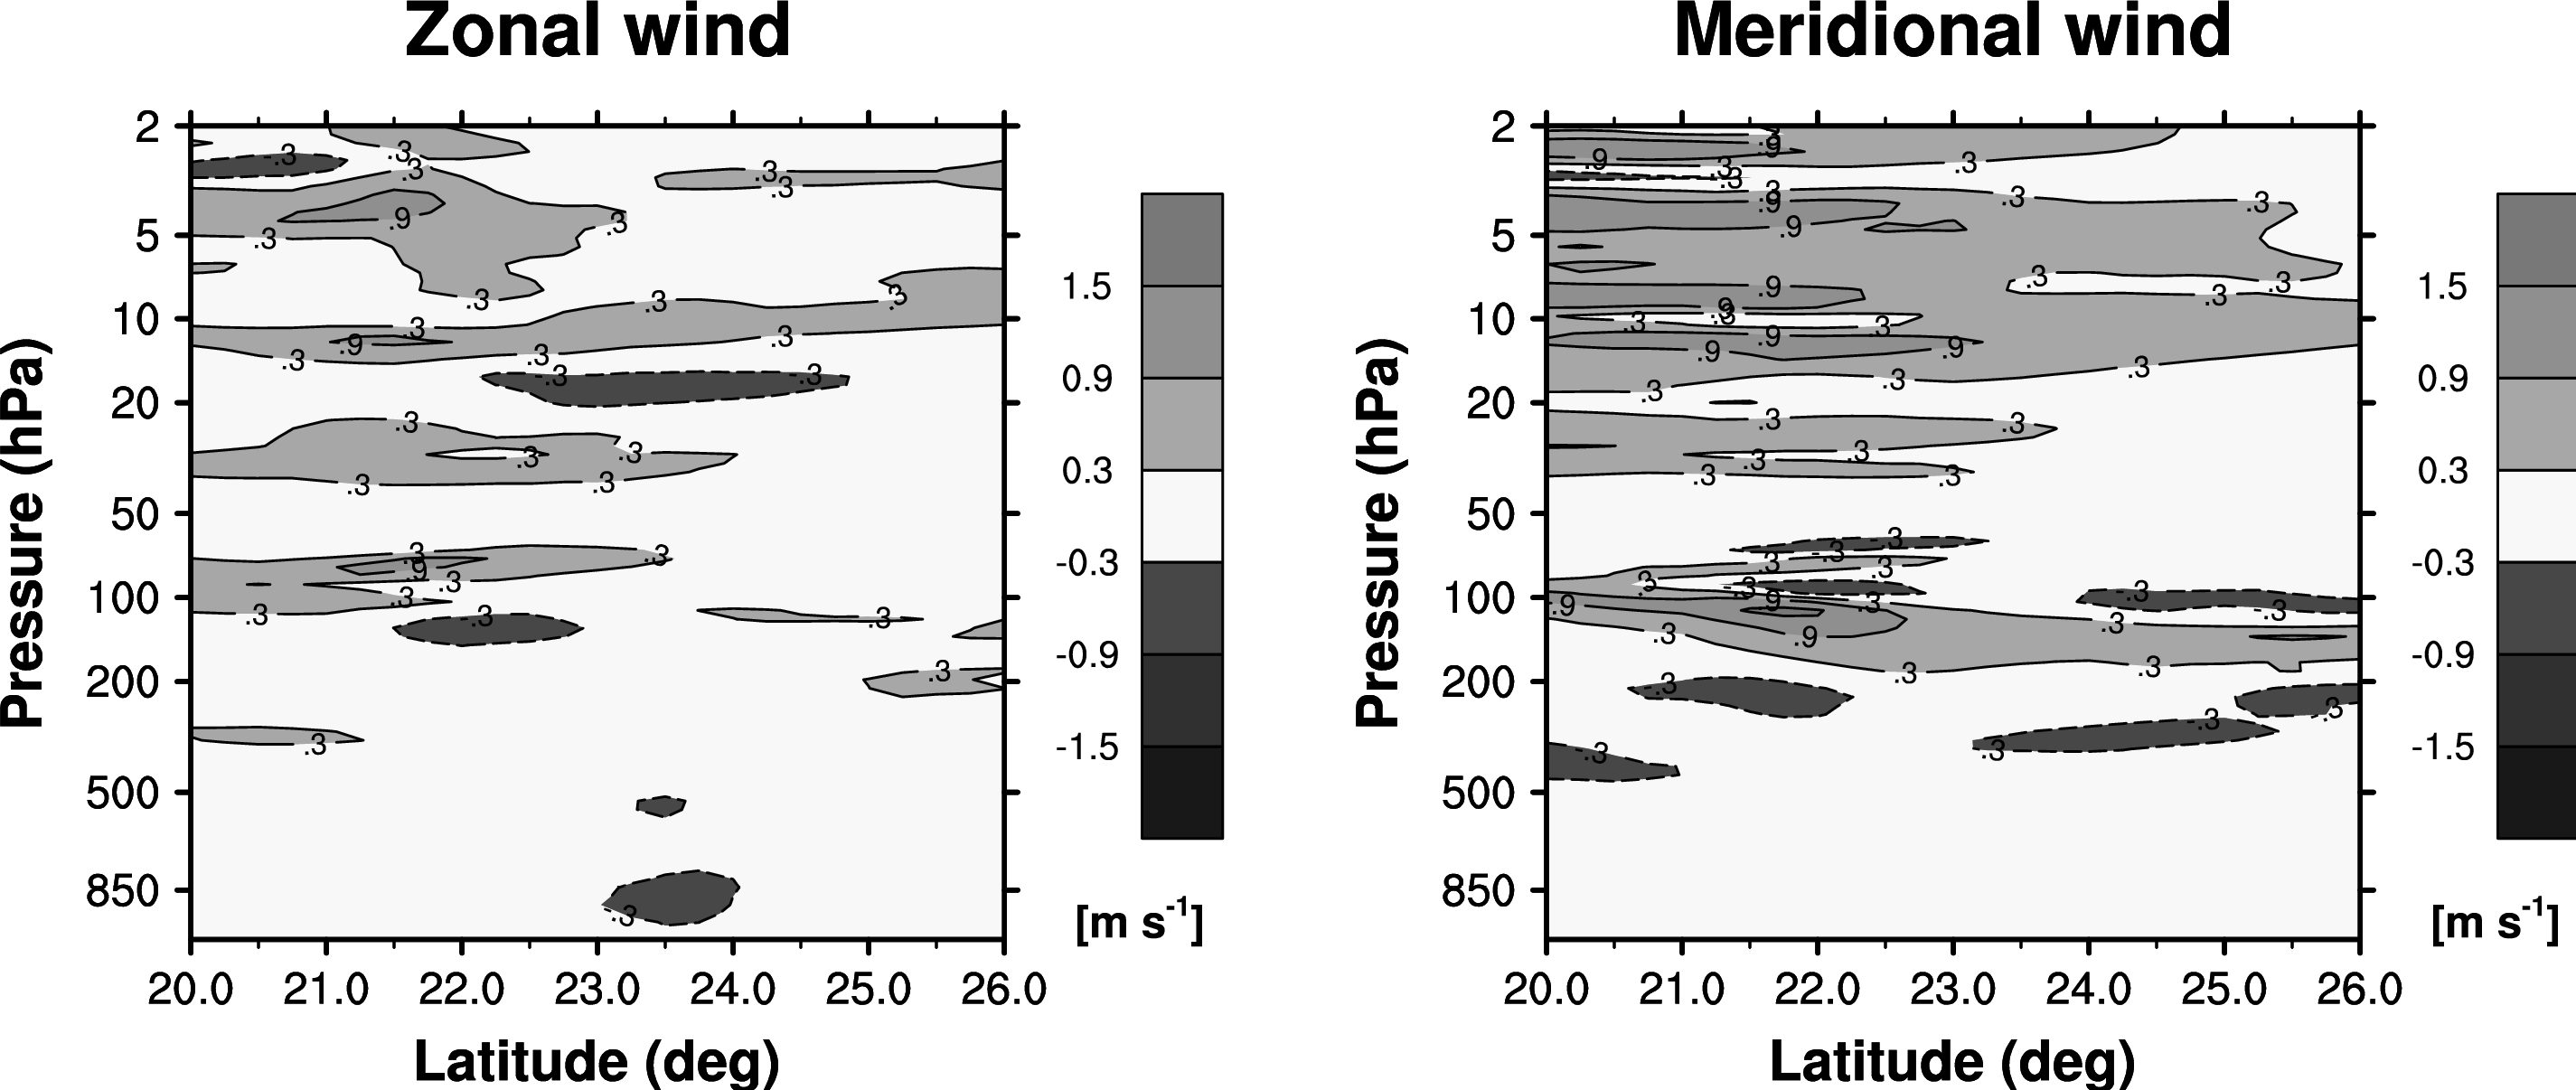 The difference in zonal (left) and meridional (right) velocity between GWDC and CTL simulations (GWDC-CTL).